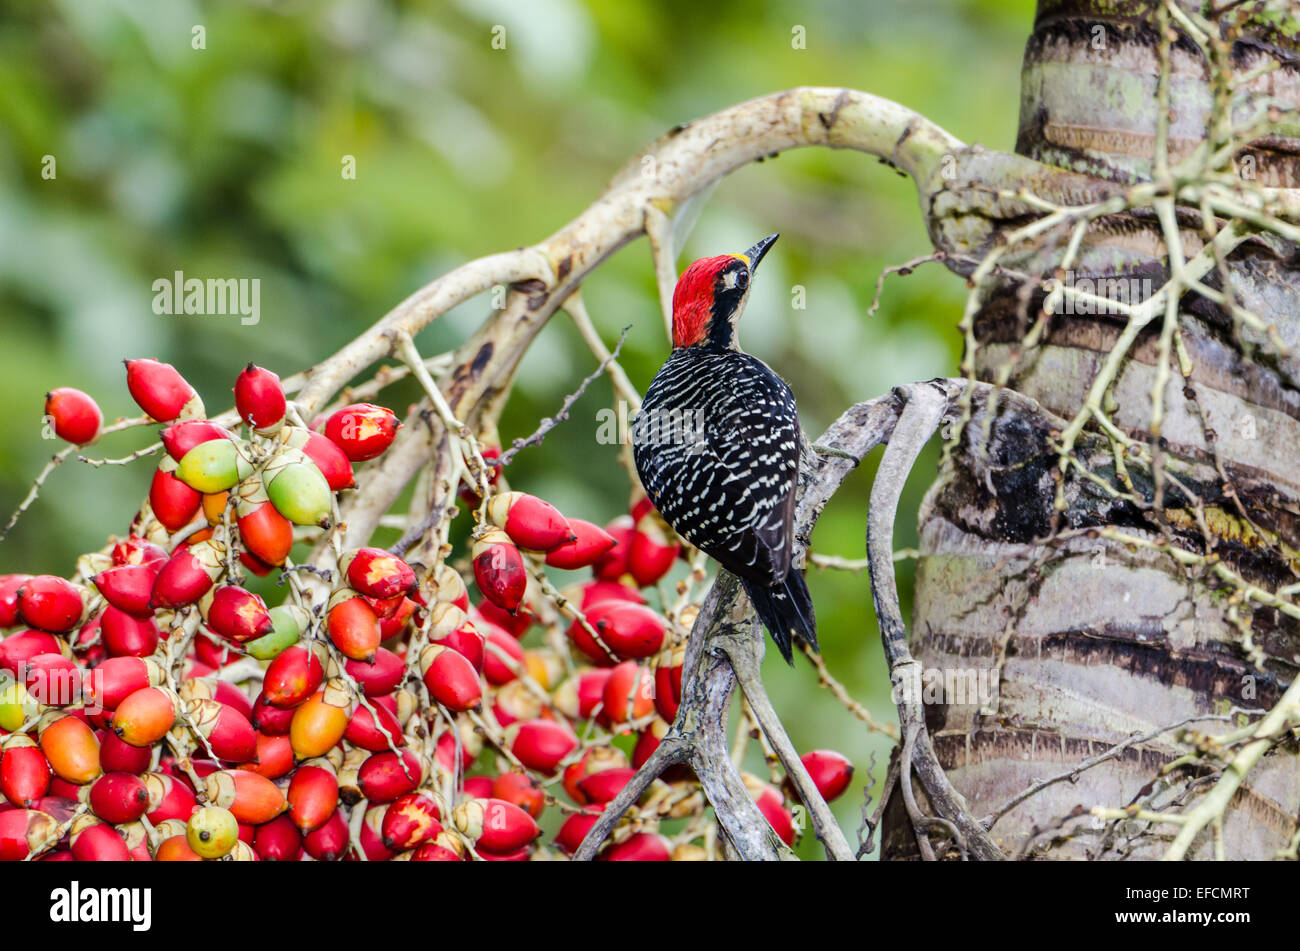 A Black-cheeked Woodpecker (Melanerpes pucherani) feeding on colorful palm fruit. Belize, Central America. Stock Photo